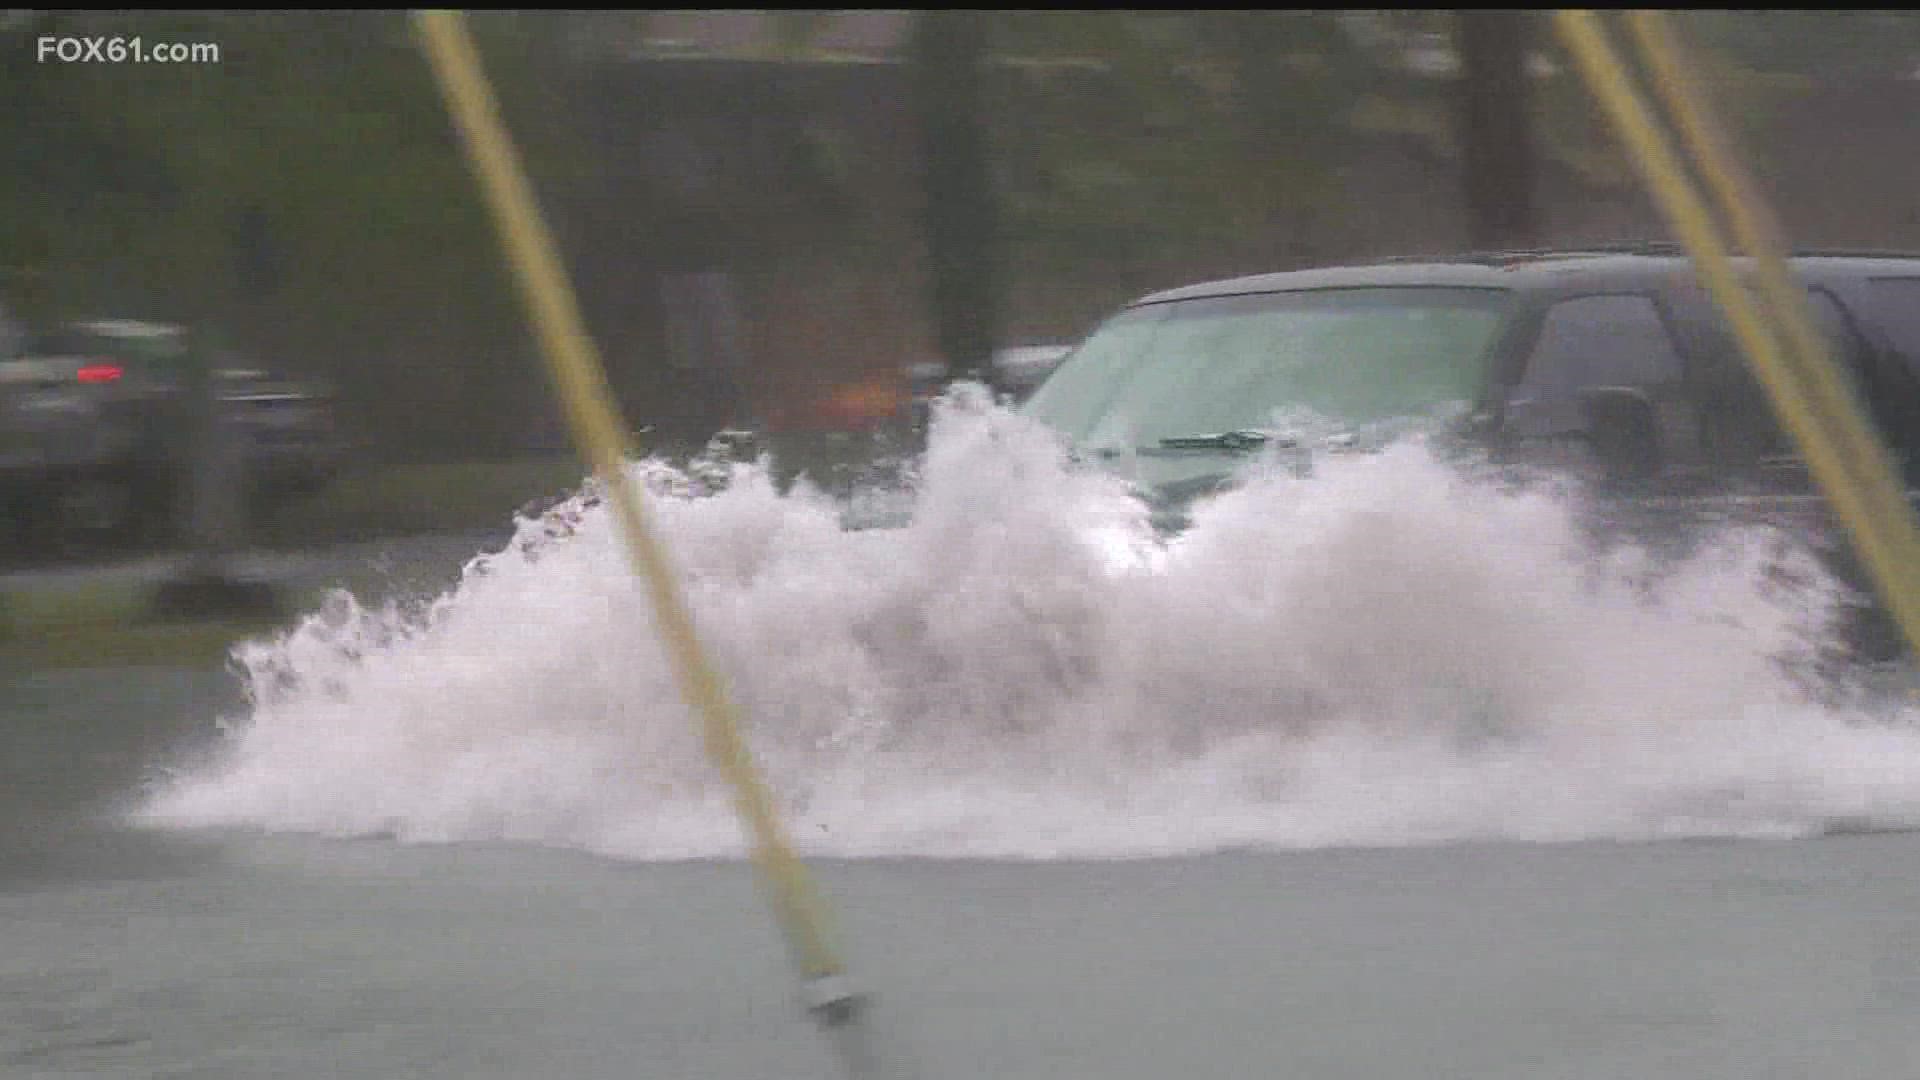 New Haven had seen heavy rain for over an hour Tuesday morning causing flooding on roads and headaches for drivers.